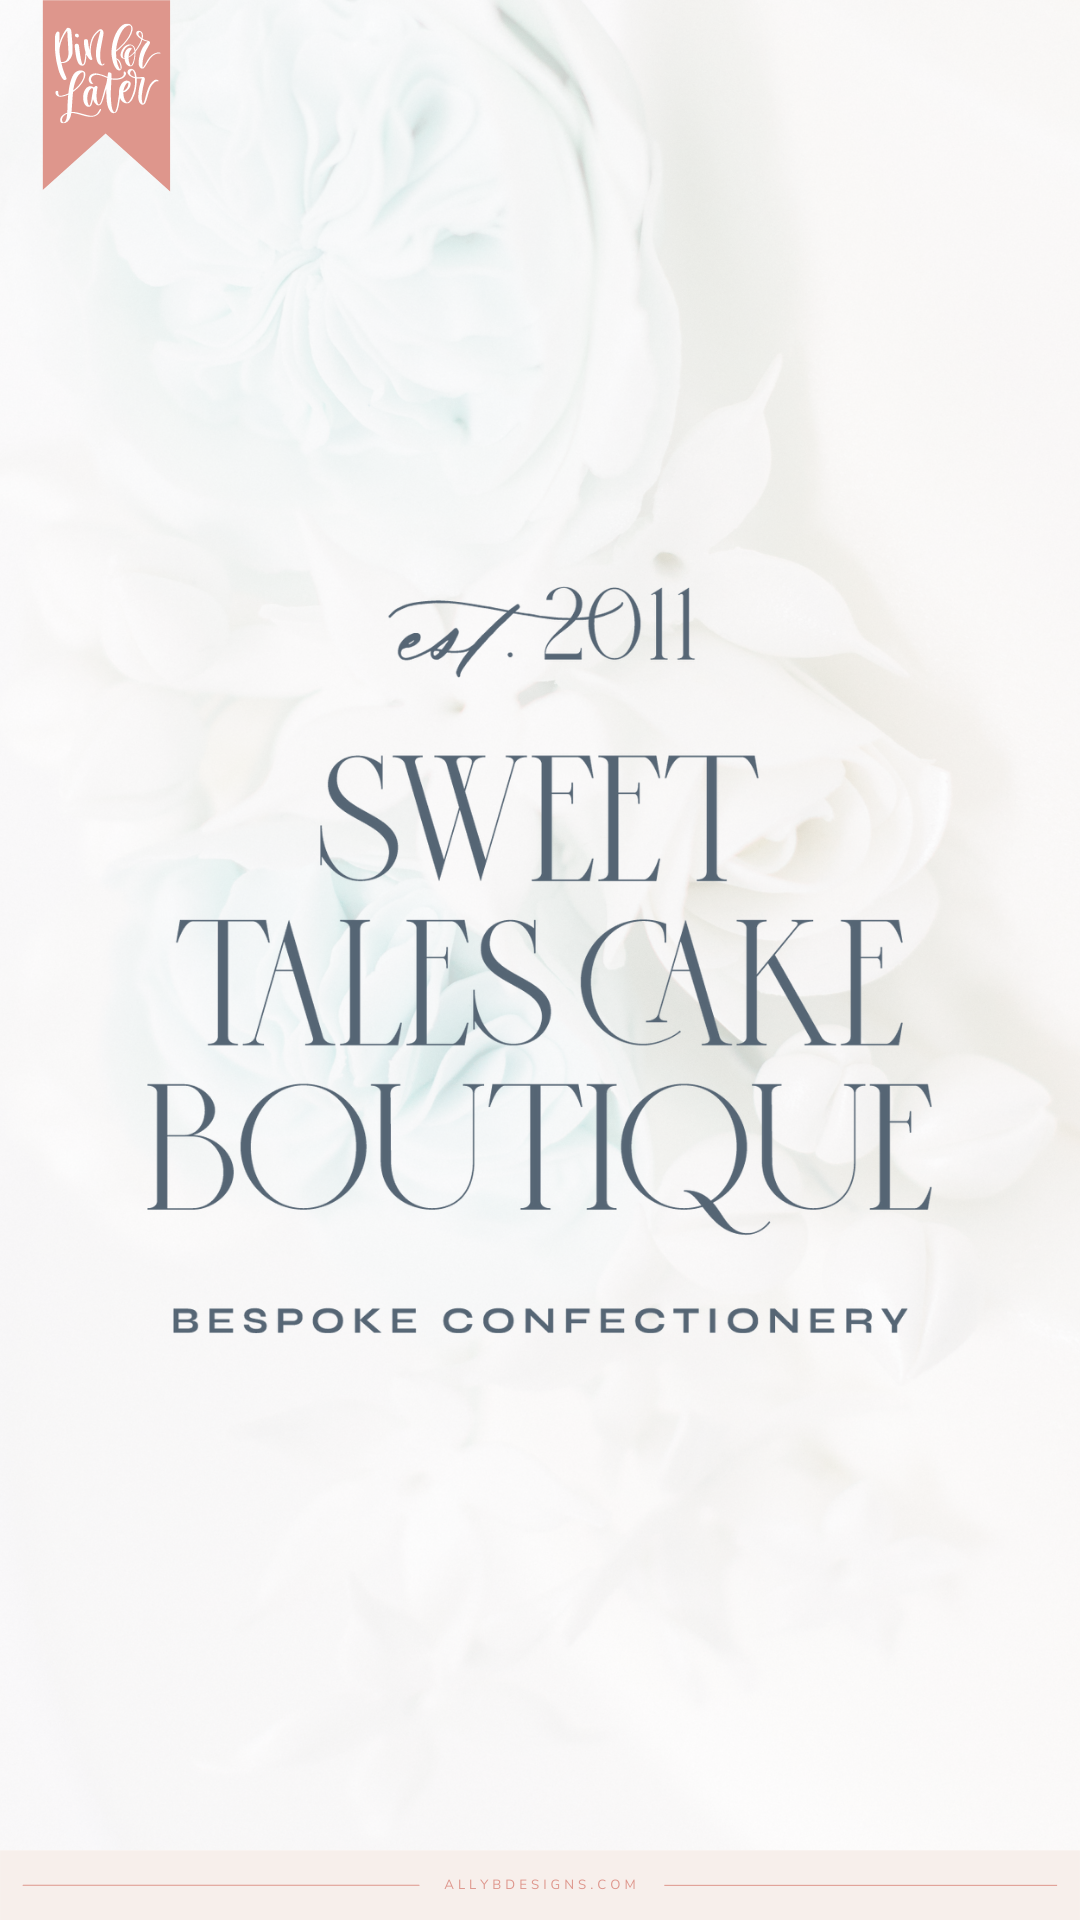 Client Celebration: Sweet Tales Cake Boutique: a Custom Wedding Cake Bakery Brand Design by Ally B Designs